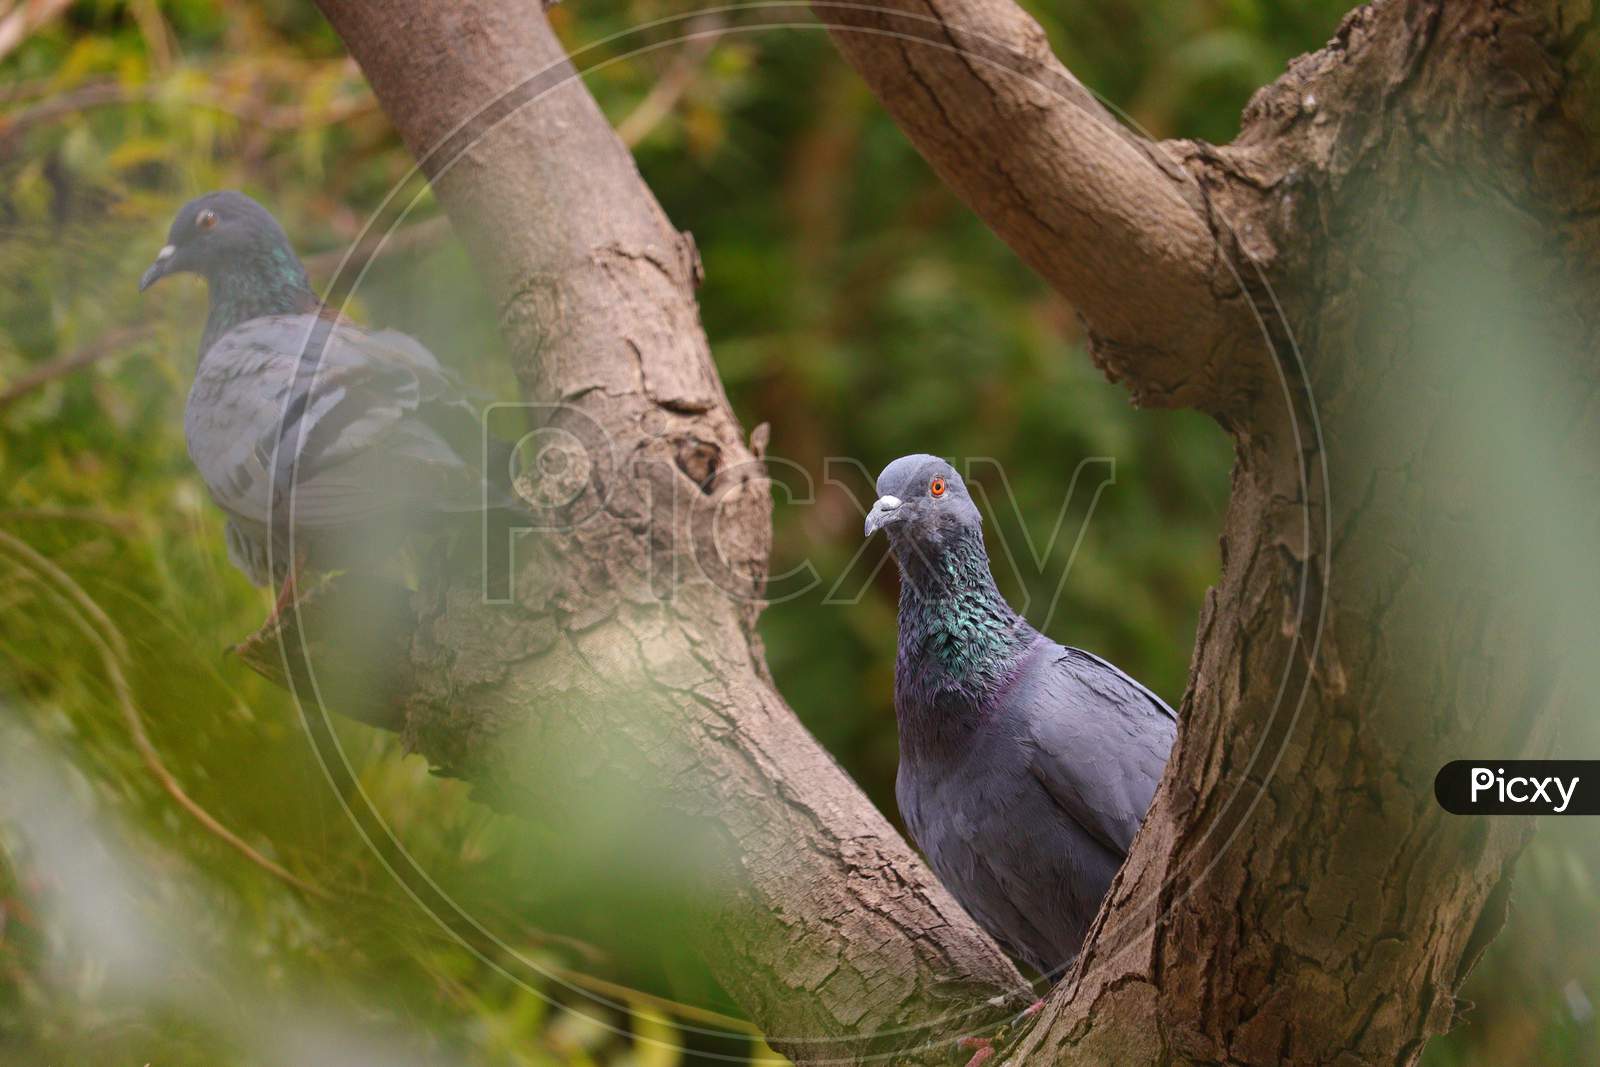 a pigeon sitting on branch of neem tree with selective focus points